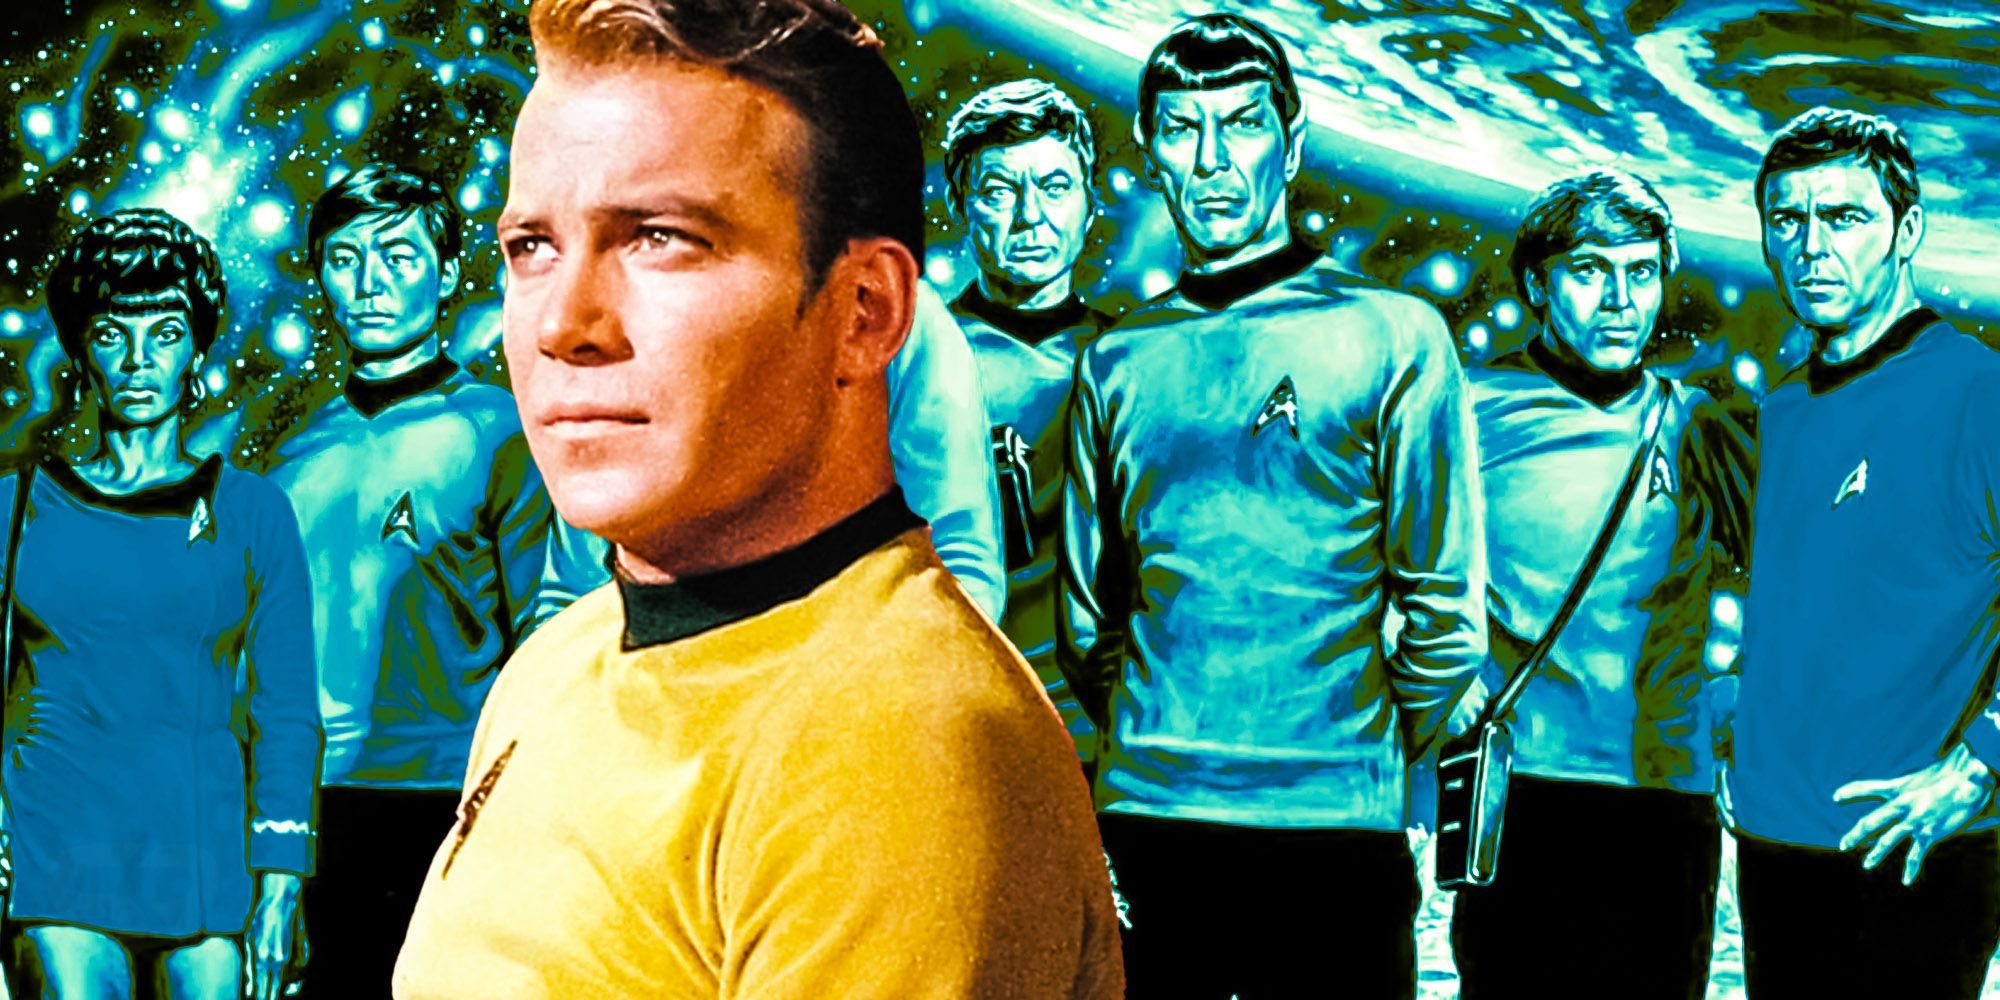 Star Trek Gets A Spot-On Son of a Critch Homage: Watch Behind The Scenes Video [Exclusive]